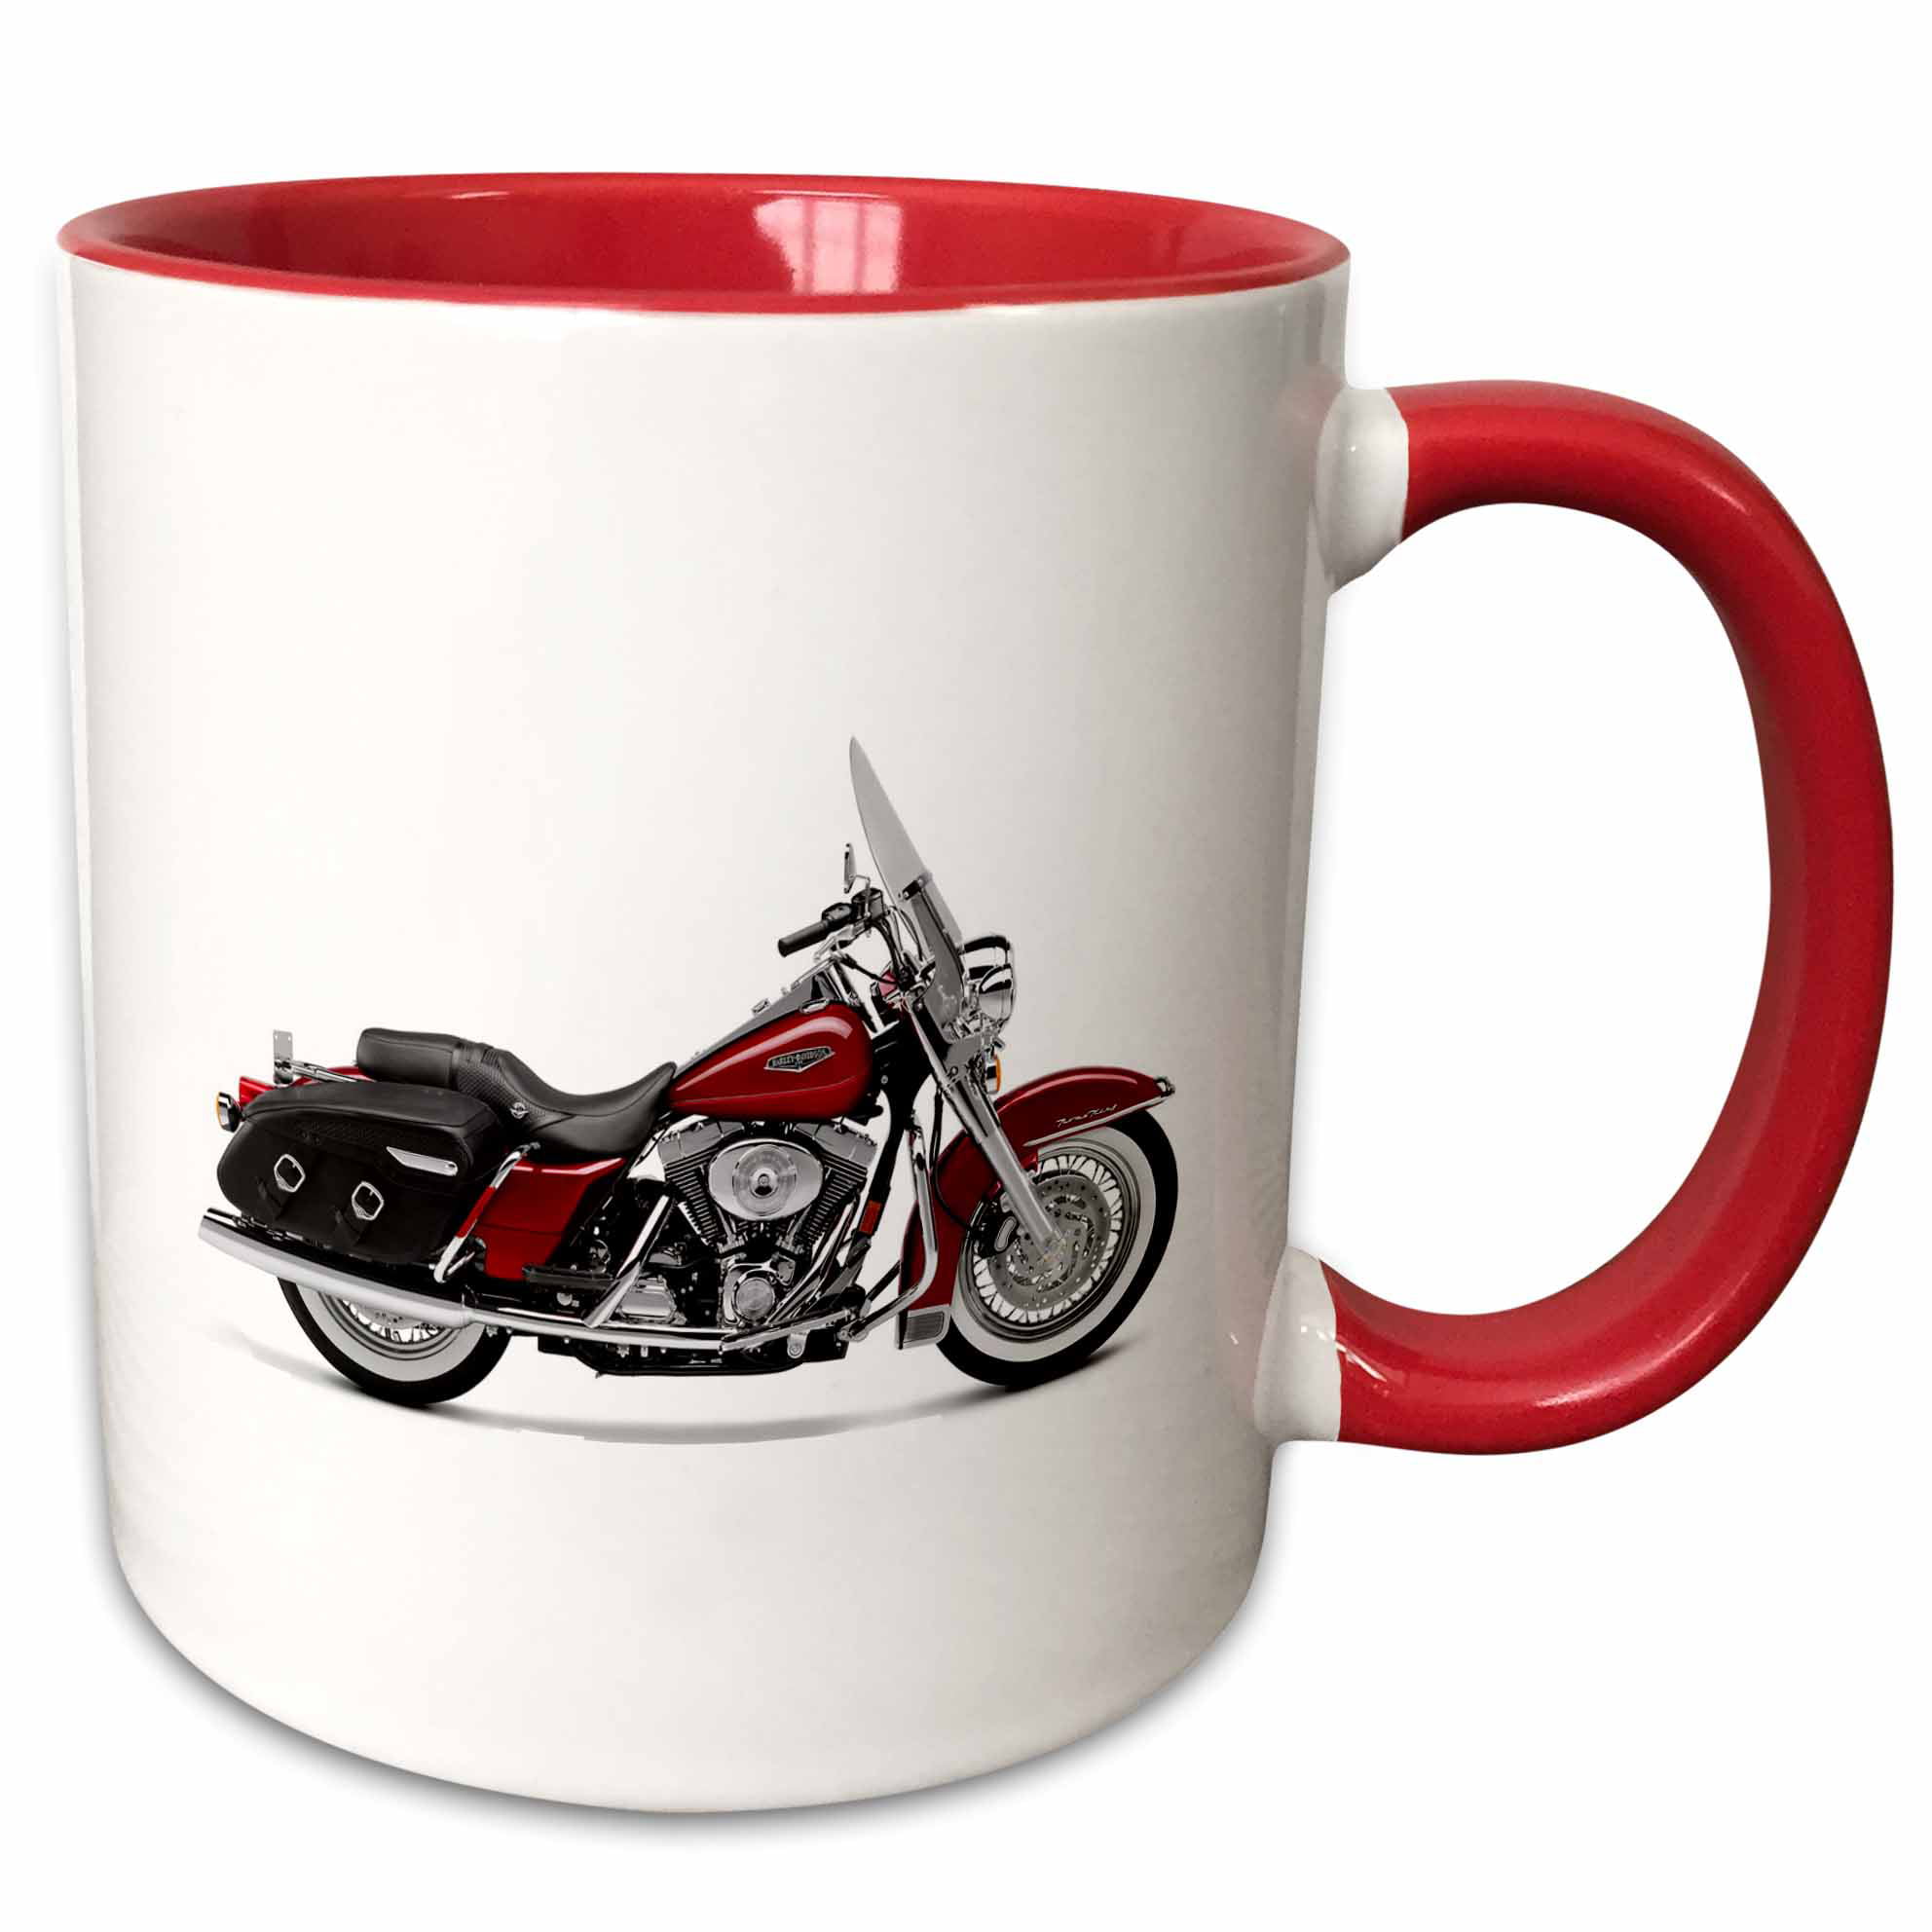 Details about   1998 Motorcycle World's Fair Monticello NY Coffee Mug Cup Black 